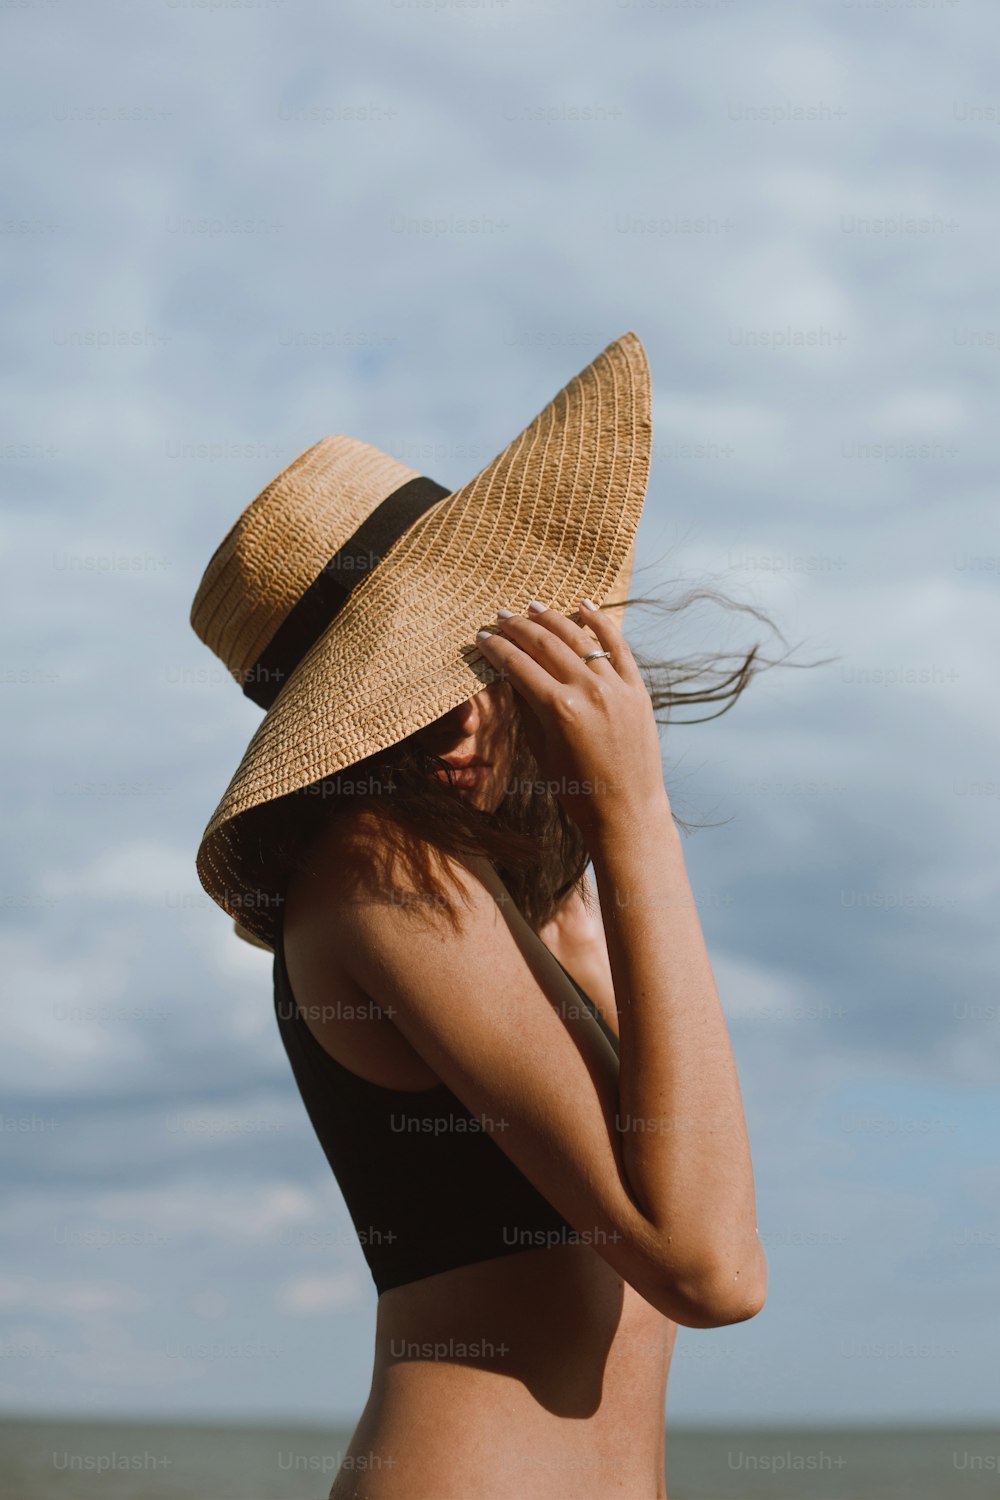 Sensual carefree girl holding hat and posing on background of blue sky in hot summer day. Fashionable tanned woman in straw hat relaxing on beach. Summer vacation